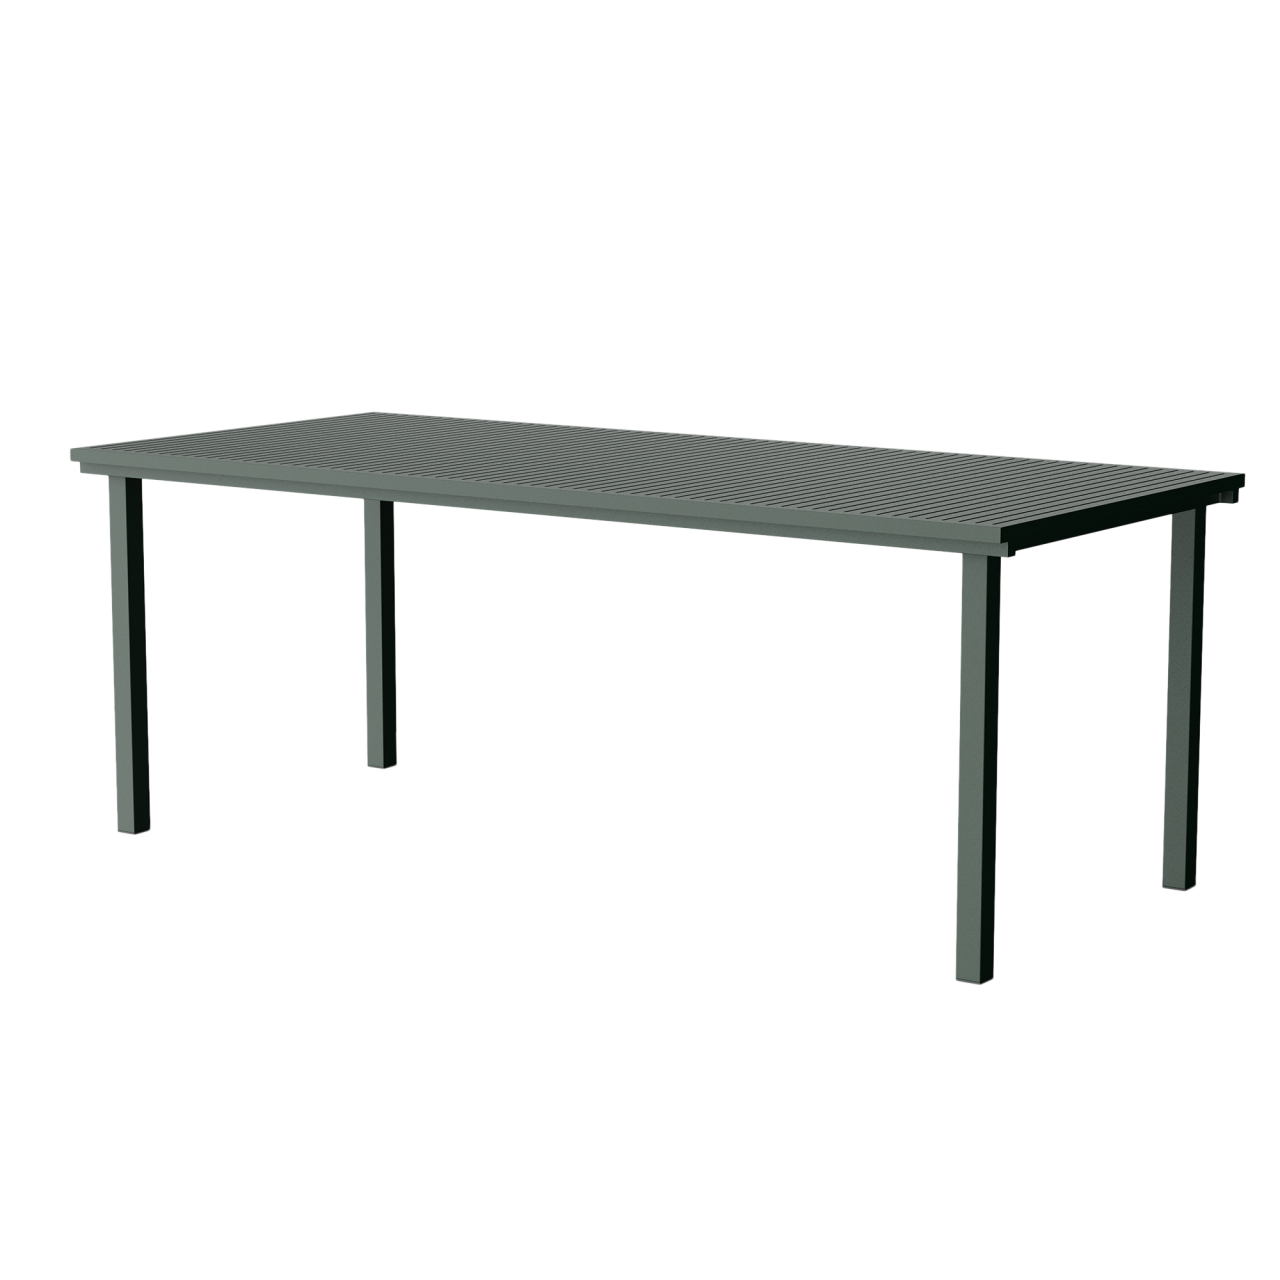 19 Outdoors Dining Table Tisch